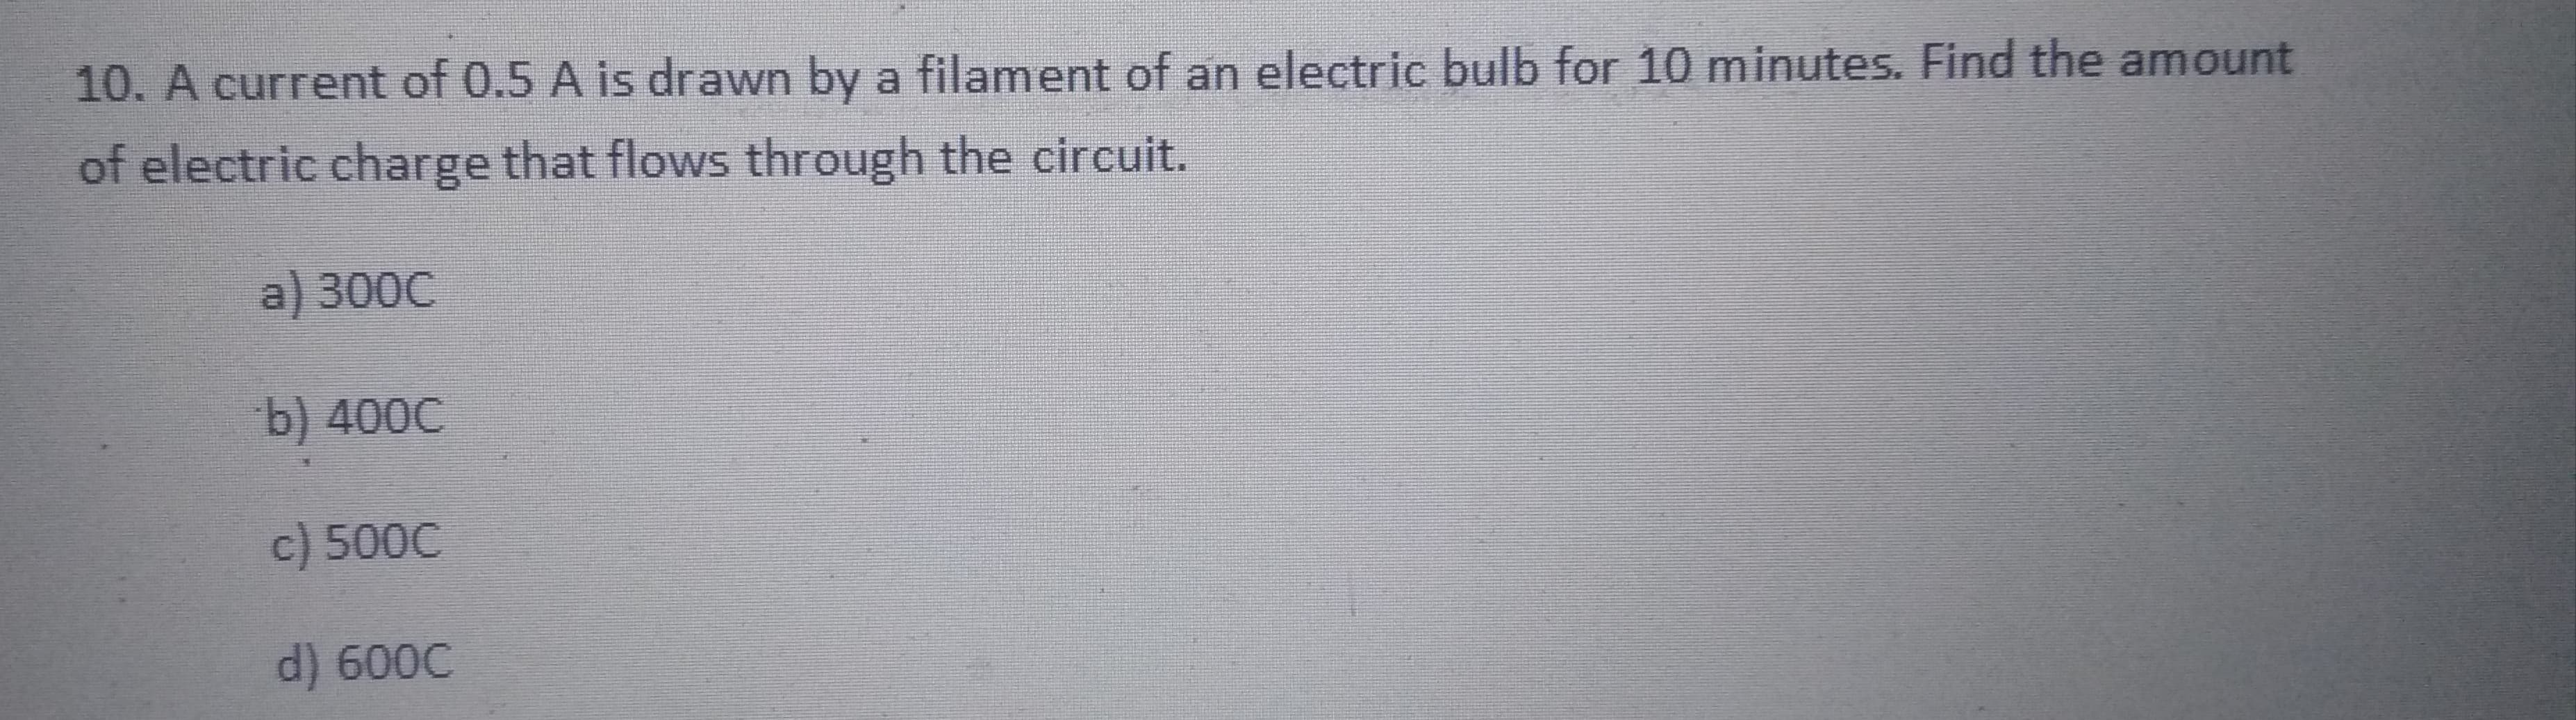 10. A current of 0.5 A is drawn by a filament of an electric bulb for 10 minutes. Find the amount
of electric charge that flows through the circuit.
